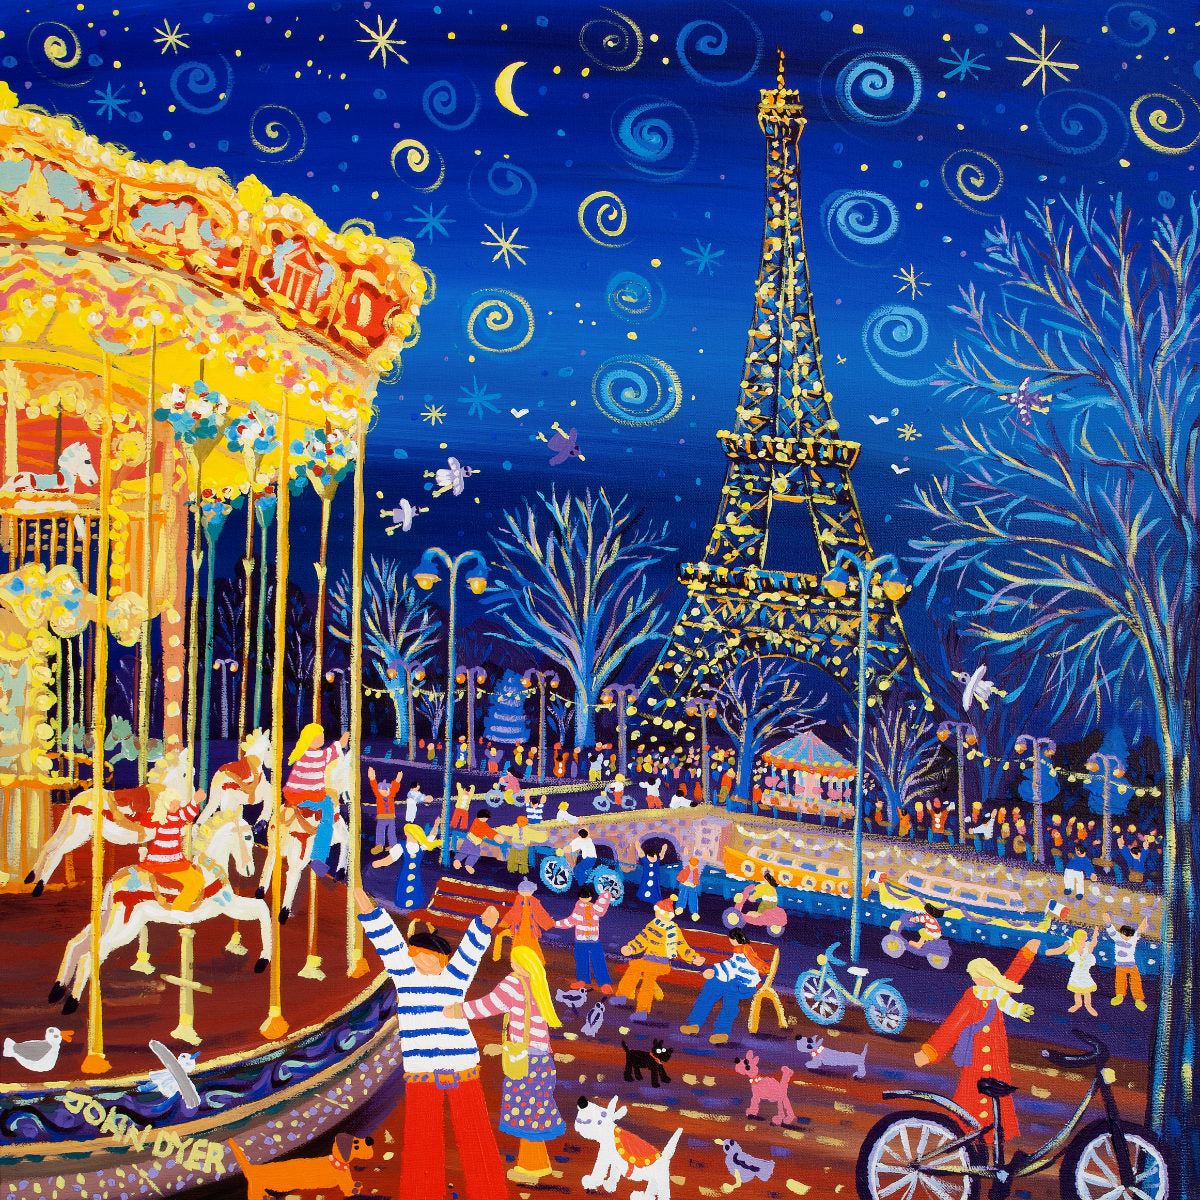 French Signed Limited Edition Print by John Dyer. 'Twinkling Lights and Carousel Delights, Paris.' Eiffel Tower Art